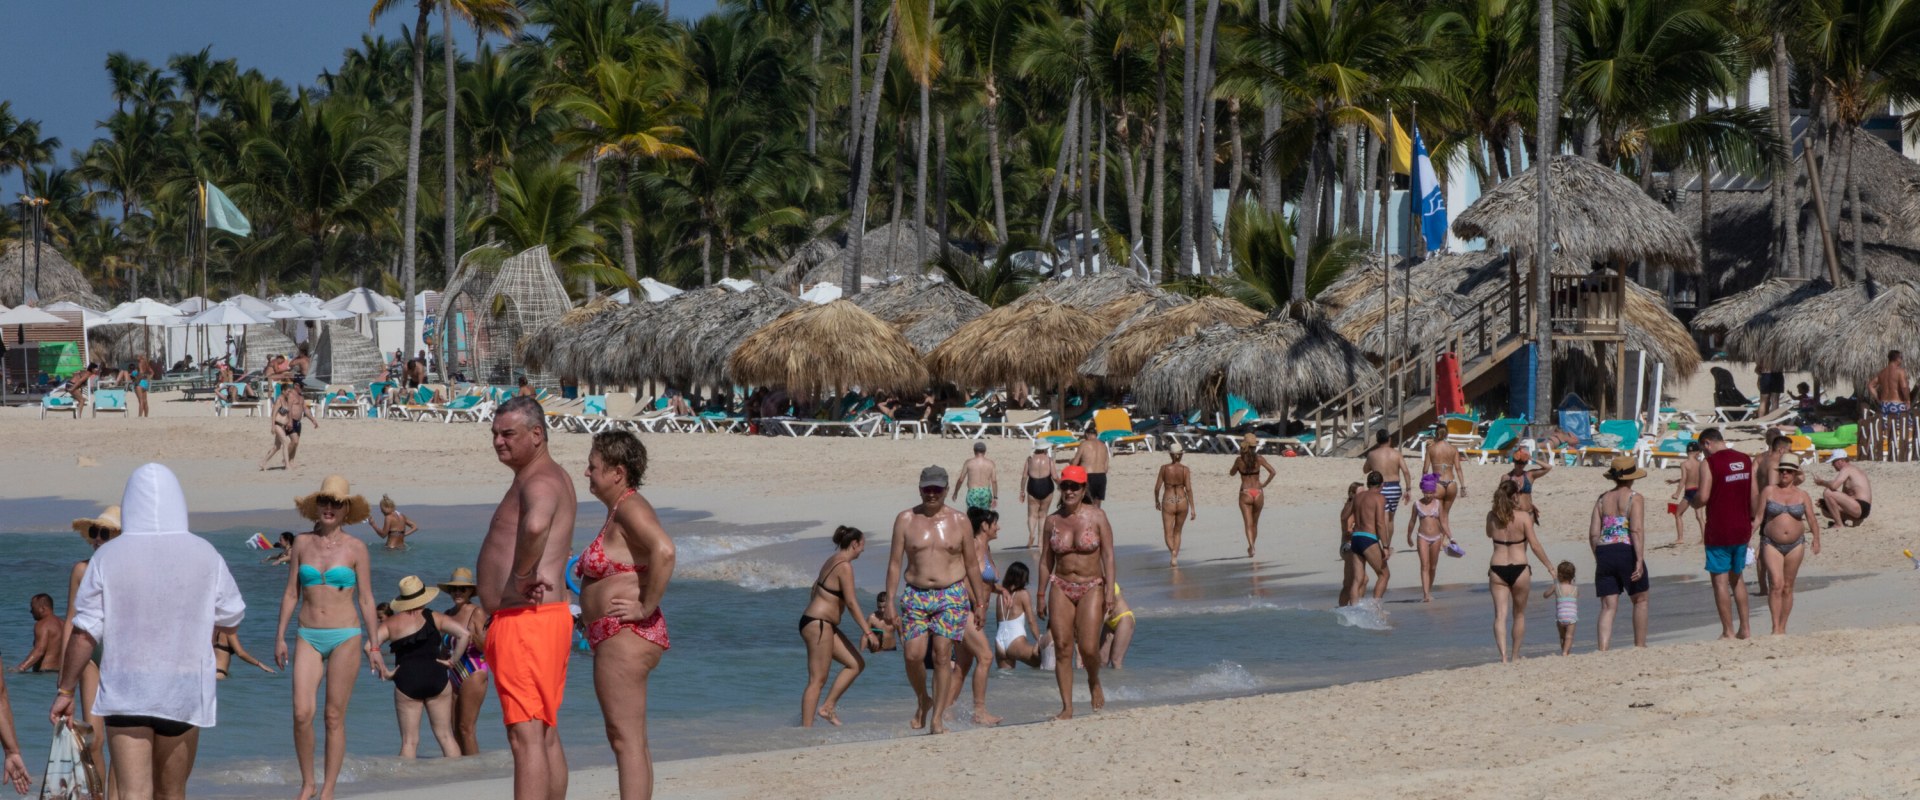 Exploring the Caribbean: An Expert's Guide to Tourism in Punta Cana